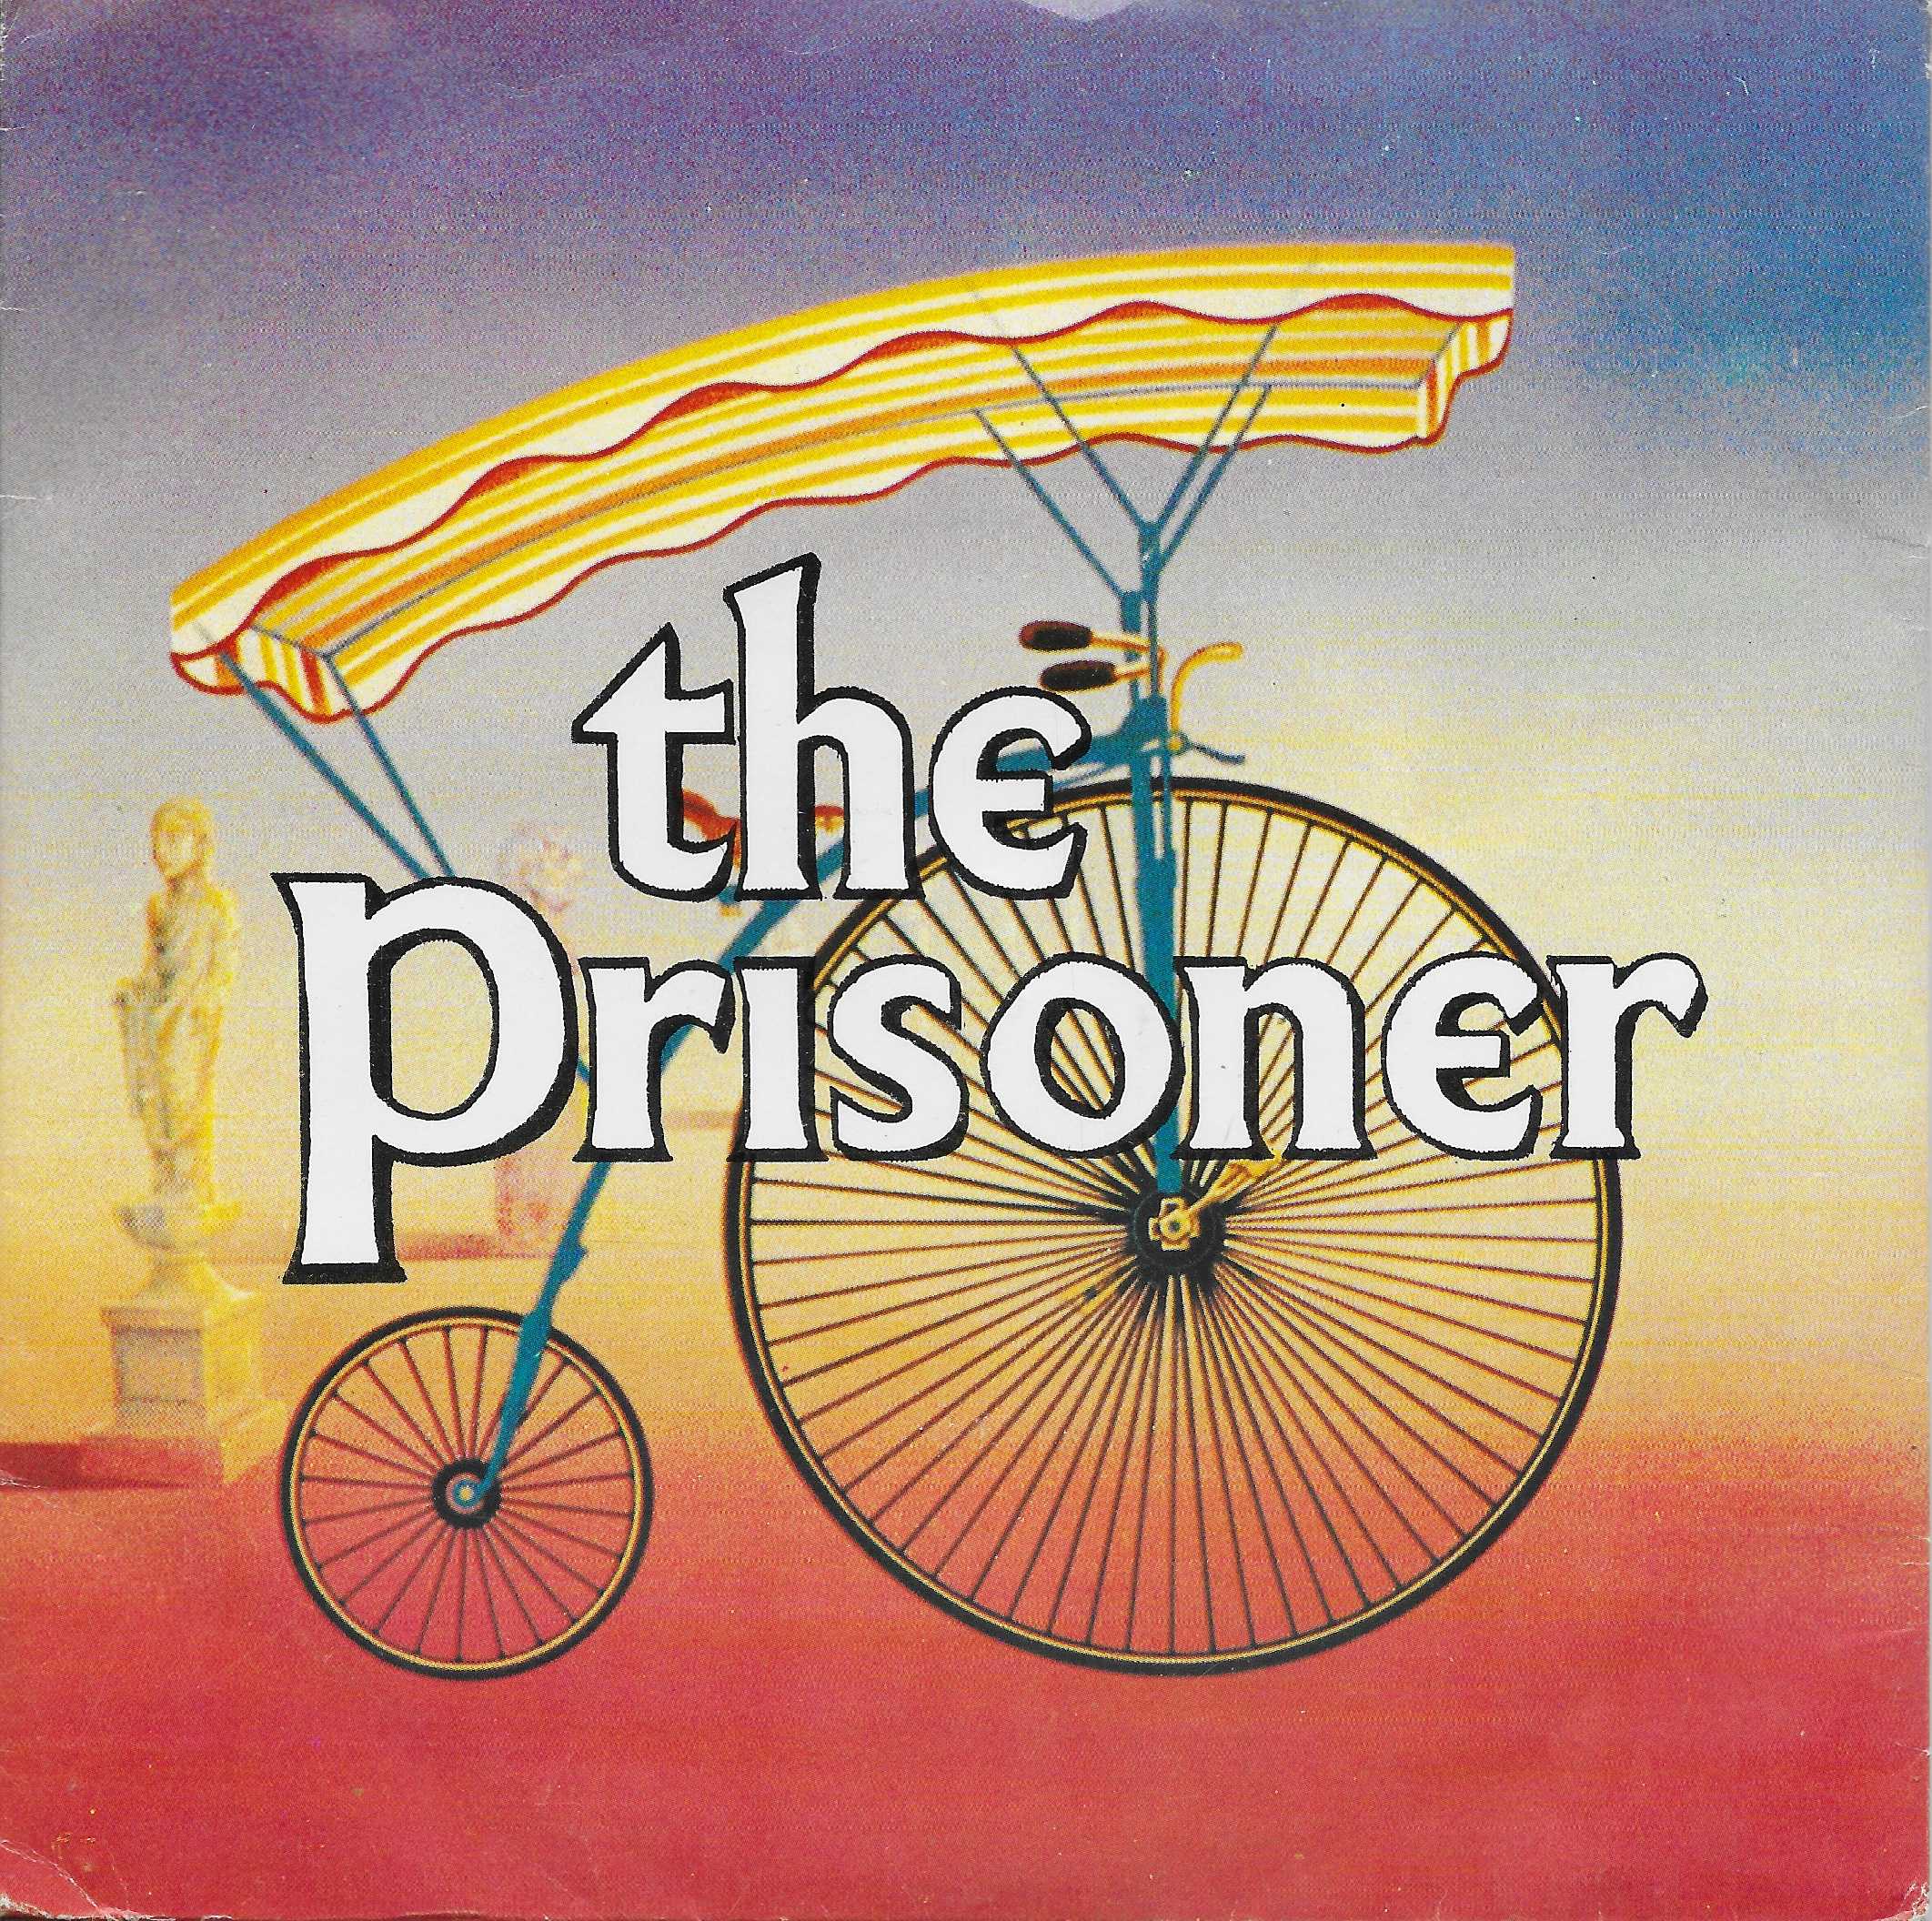 Picture of 6 OF 1 The Prisoner - Arrival by artist Ron Grainer / The Ron Grainer Orchestra from ITV, Channel 4 and Channel 5 singles library